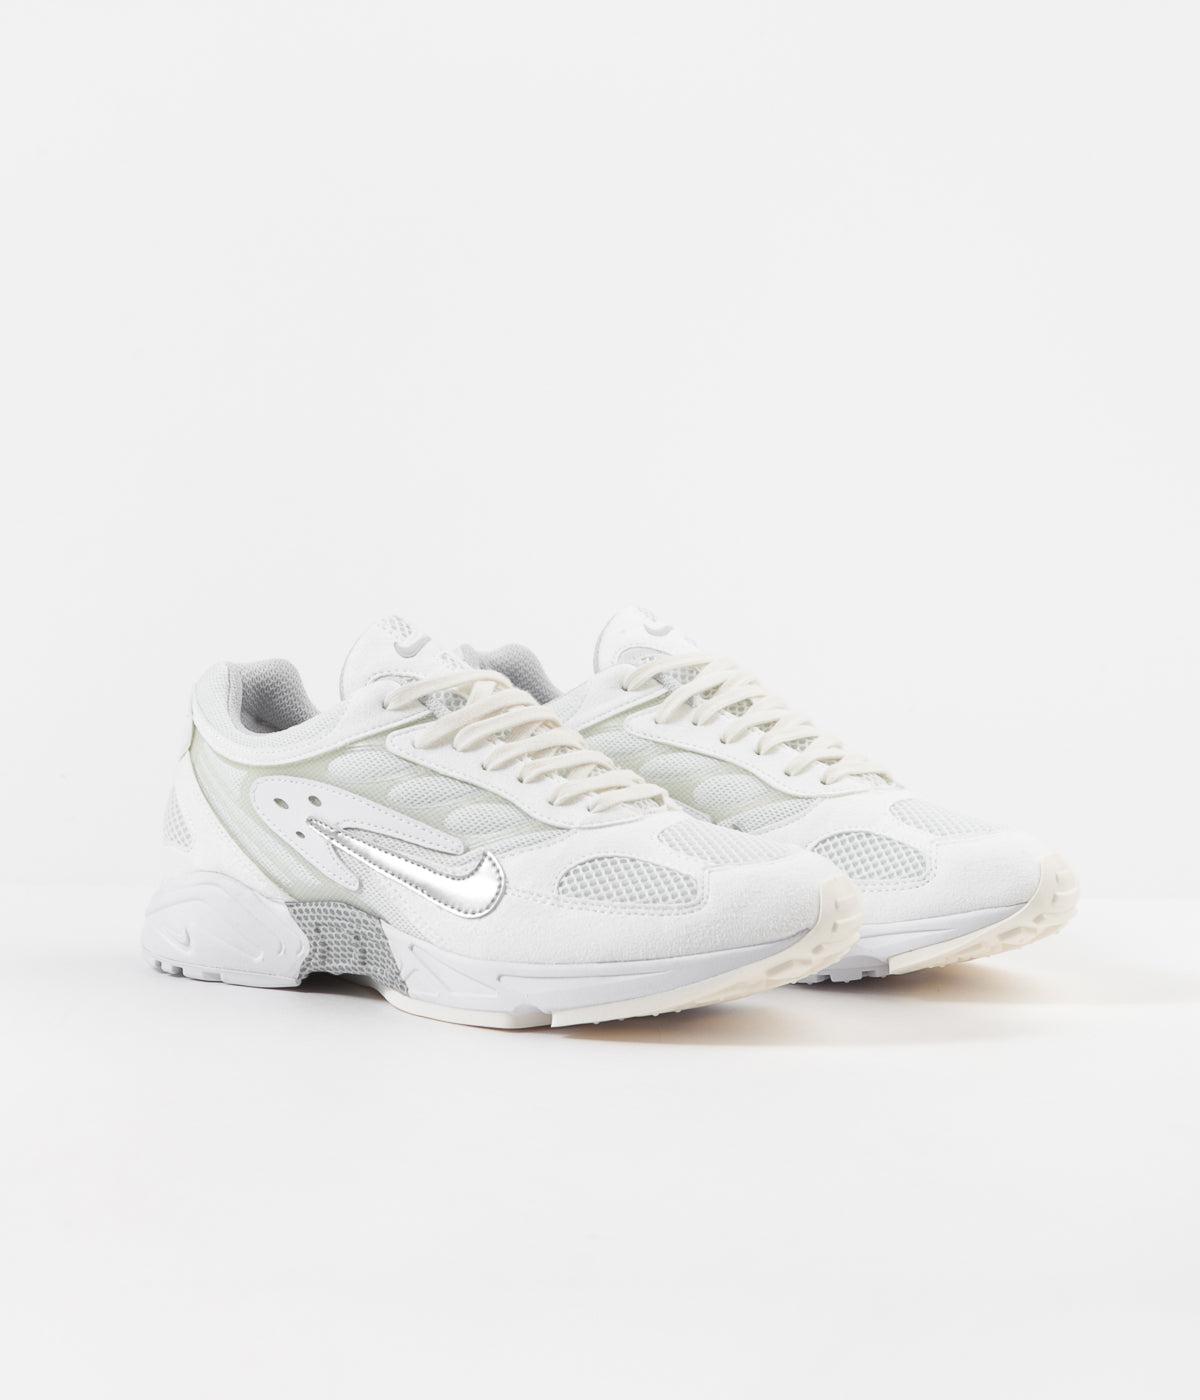 Nike Air Ghost Racer Shoes - White 